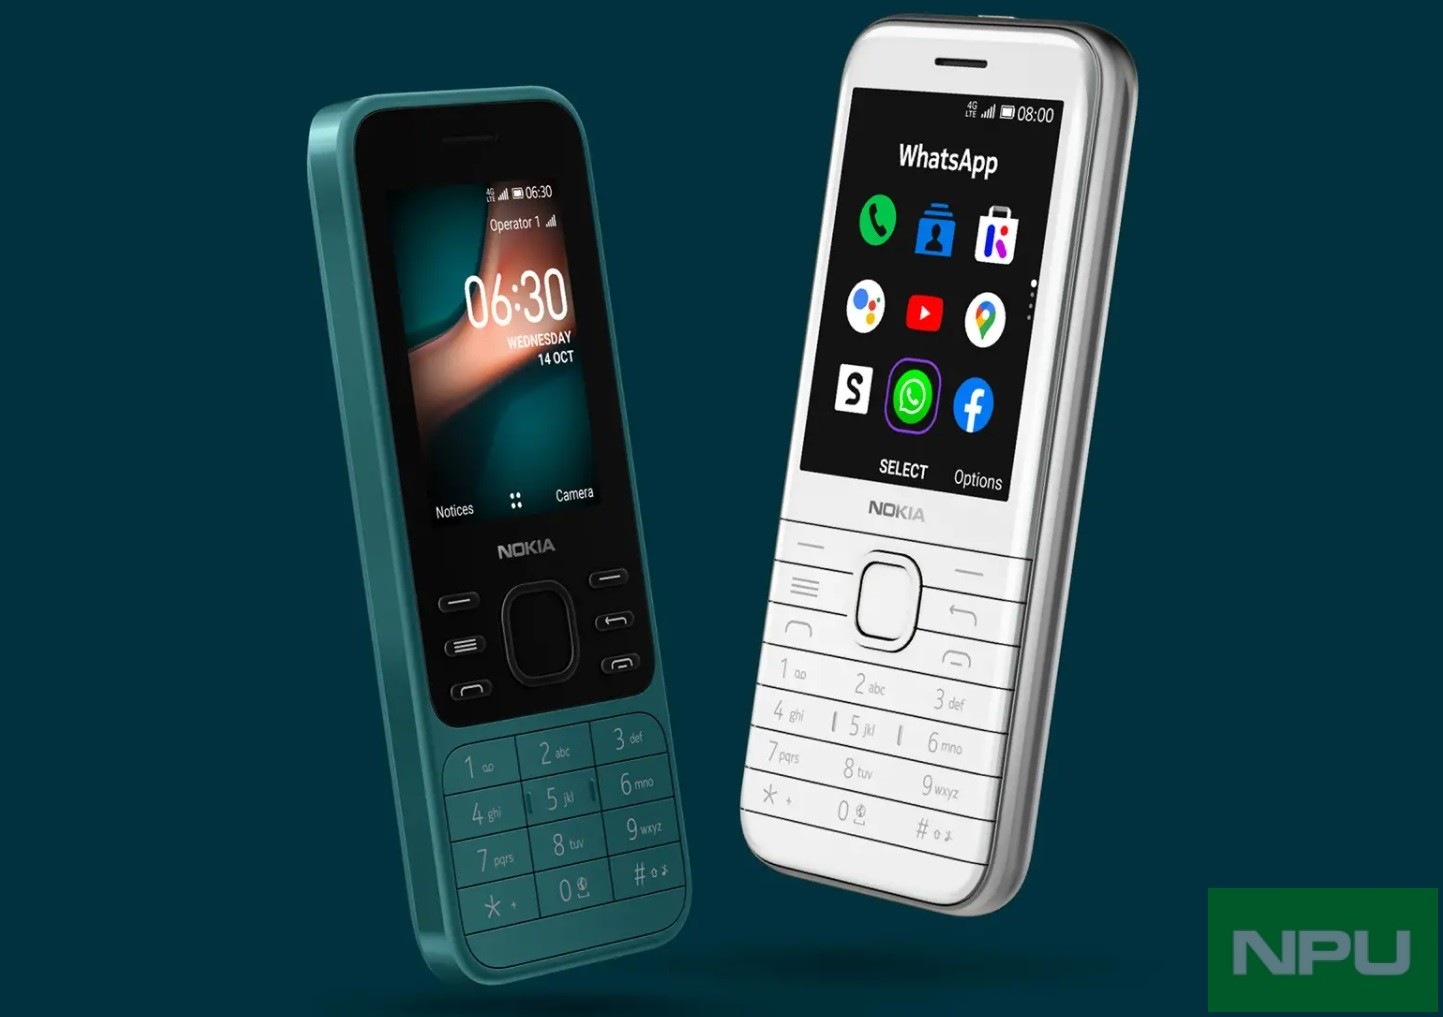 WhatsApp voice calling coming to many Nokia feature phones - PhoneArena